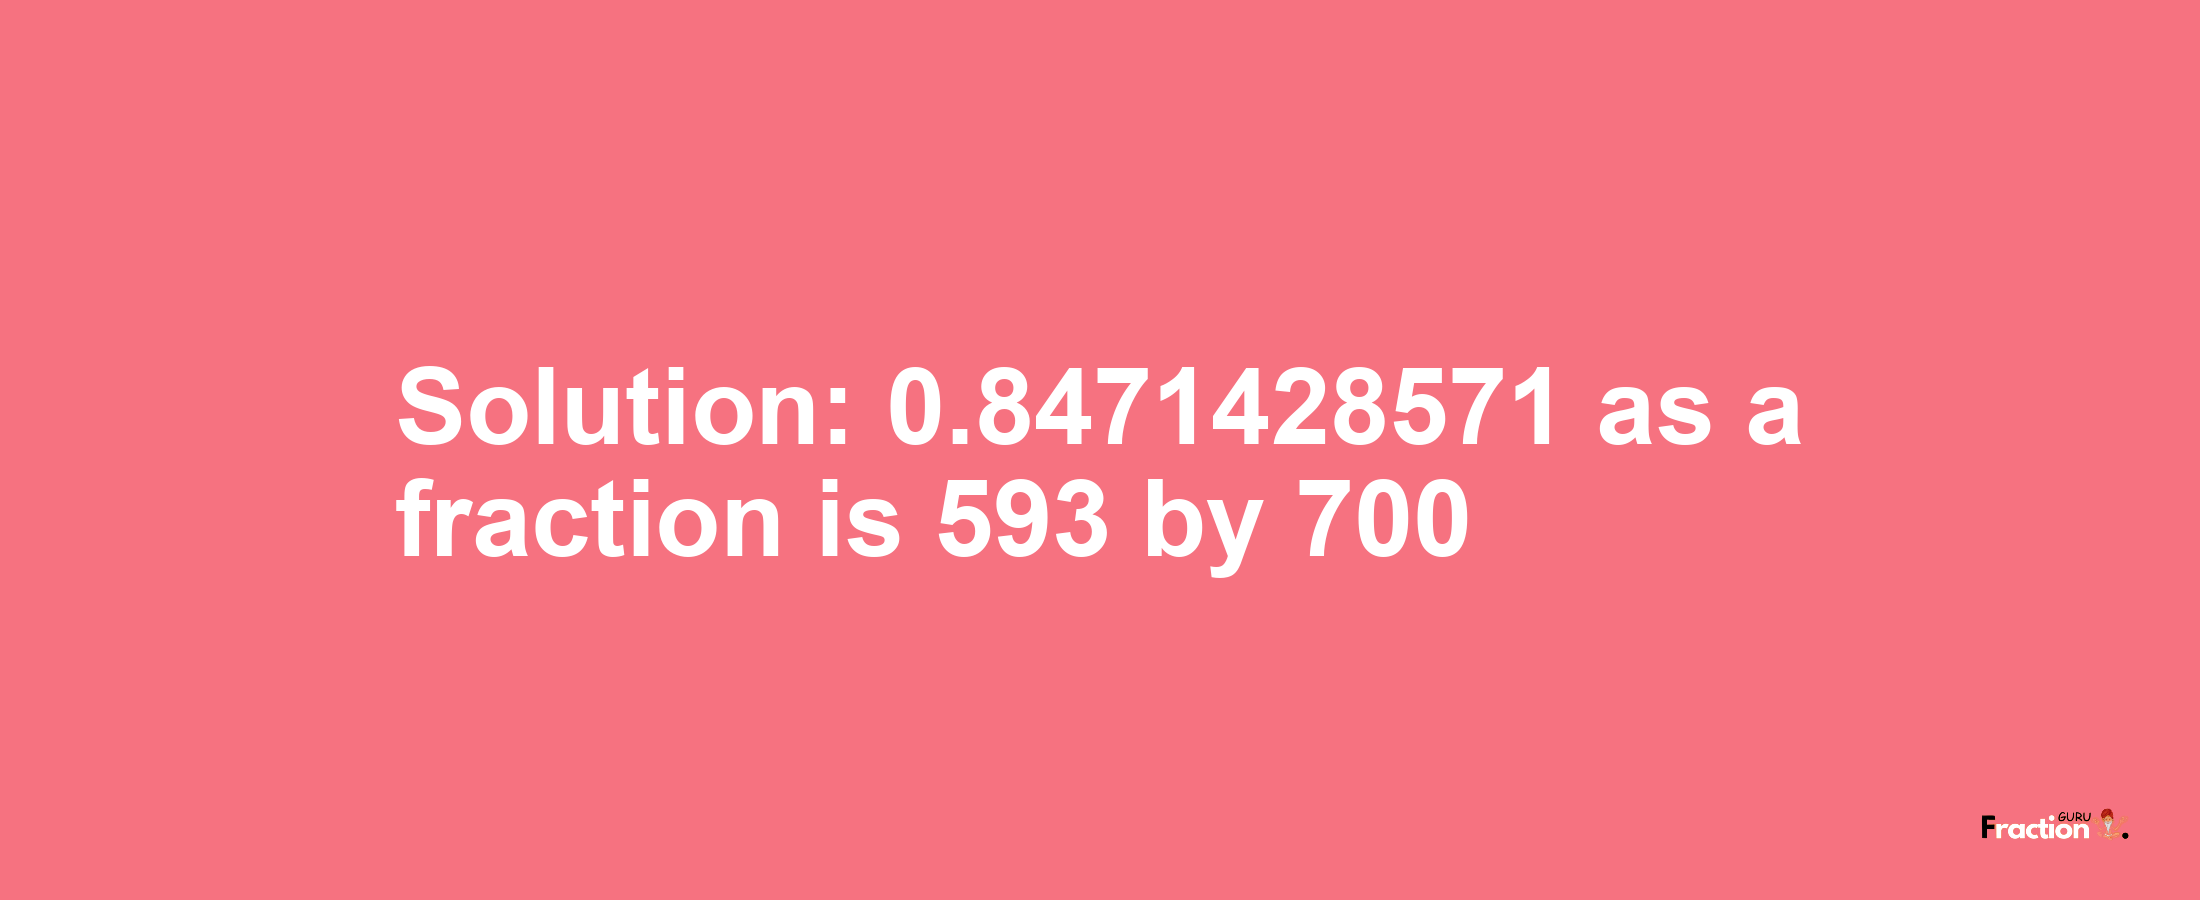 Solution:0.8471428571 as a fraction is 593/700